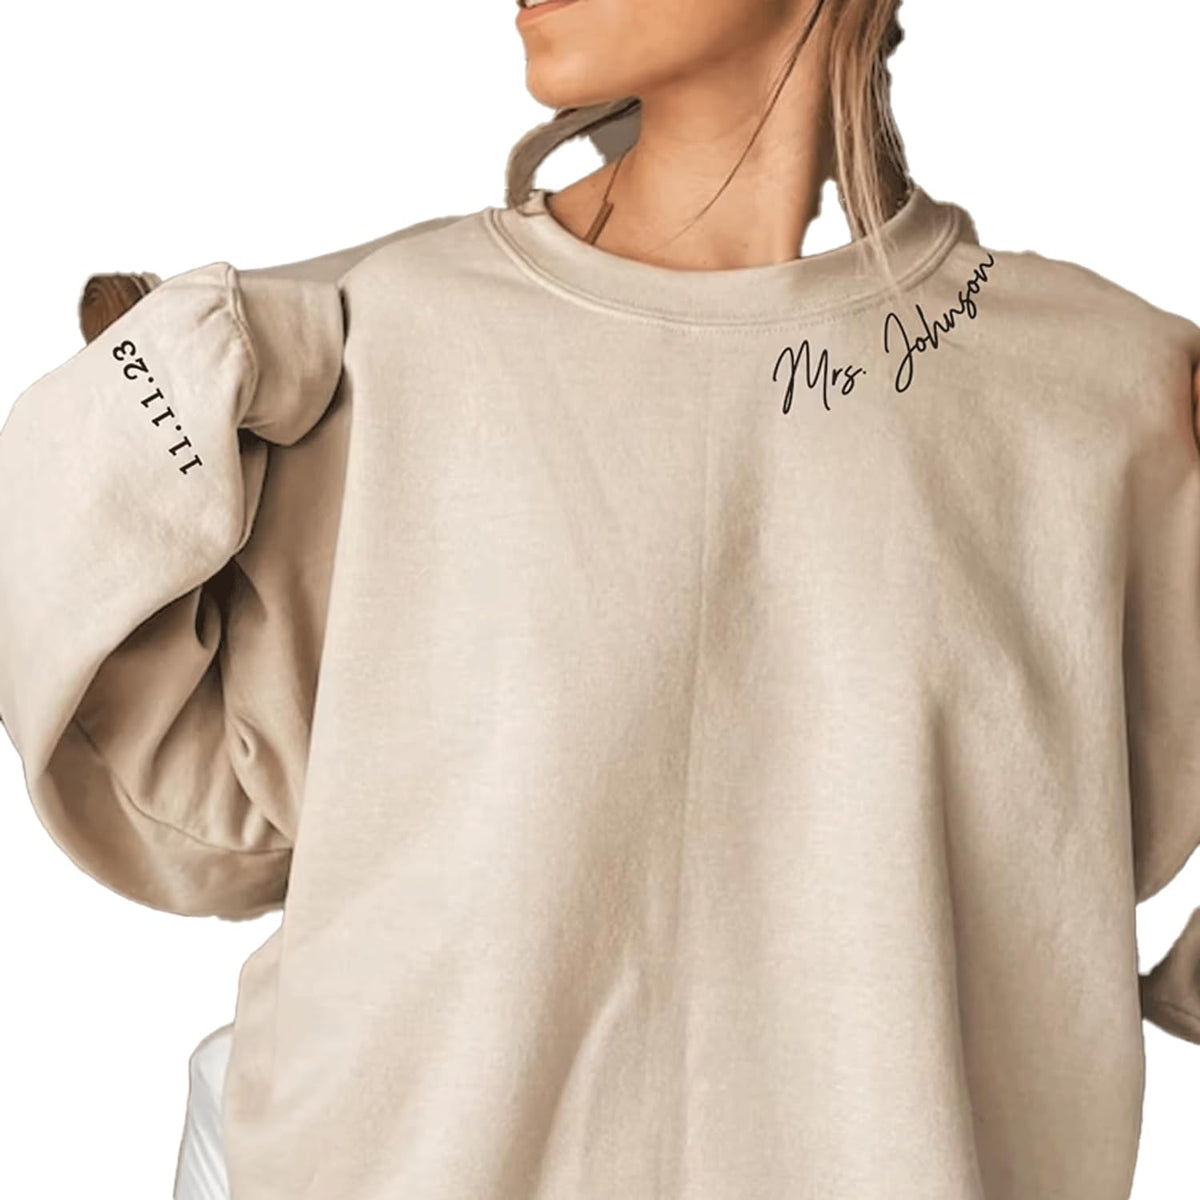 a woman with a ponytail wearing a sweatshirt